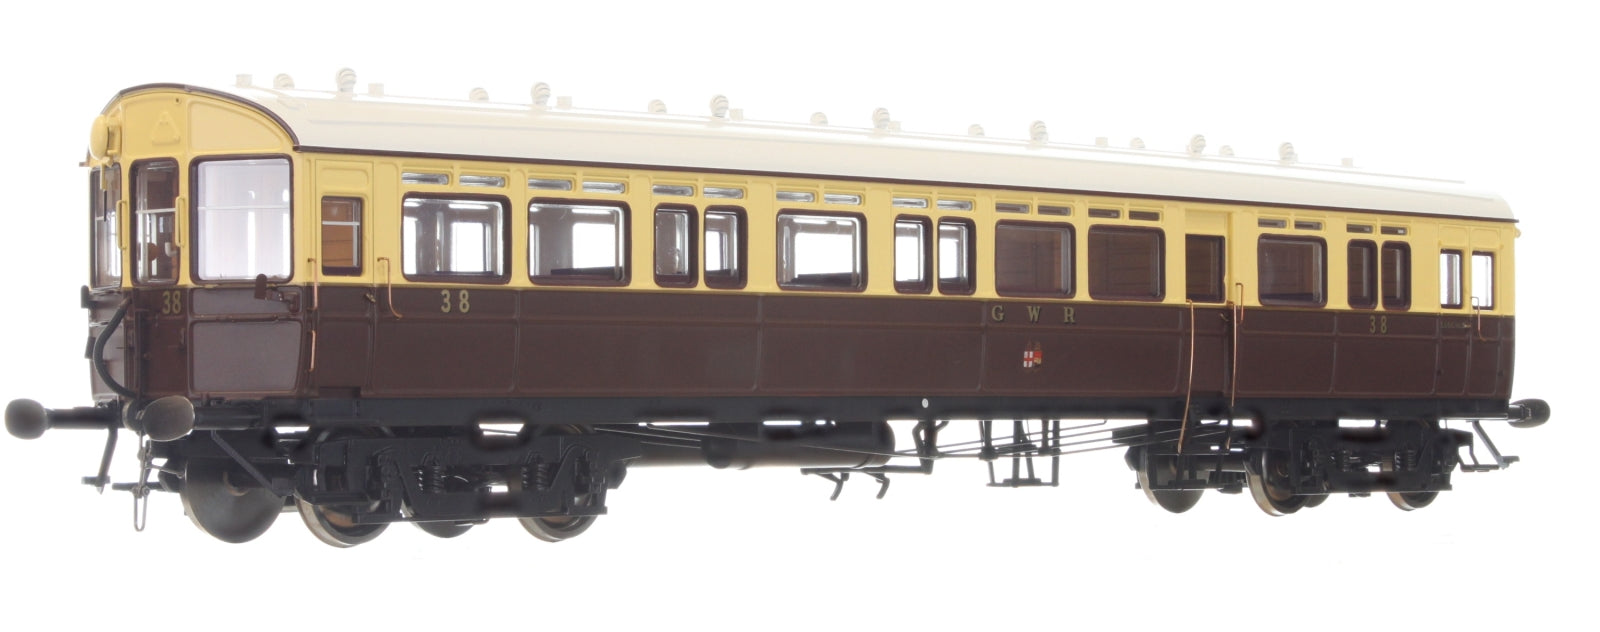 7P-004-011 O Gauge Autocoach GWR Twin Cities Crest 38 Choc & Crm